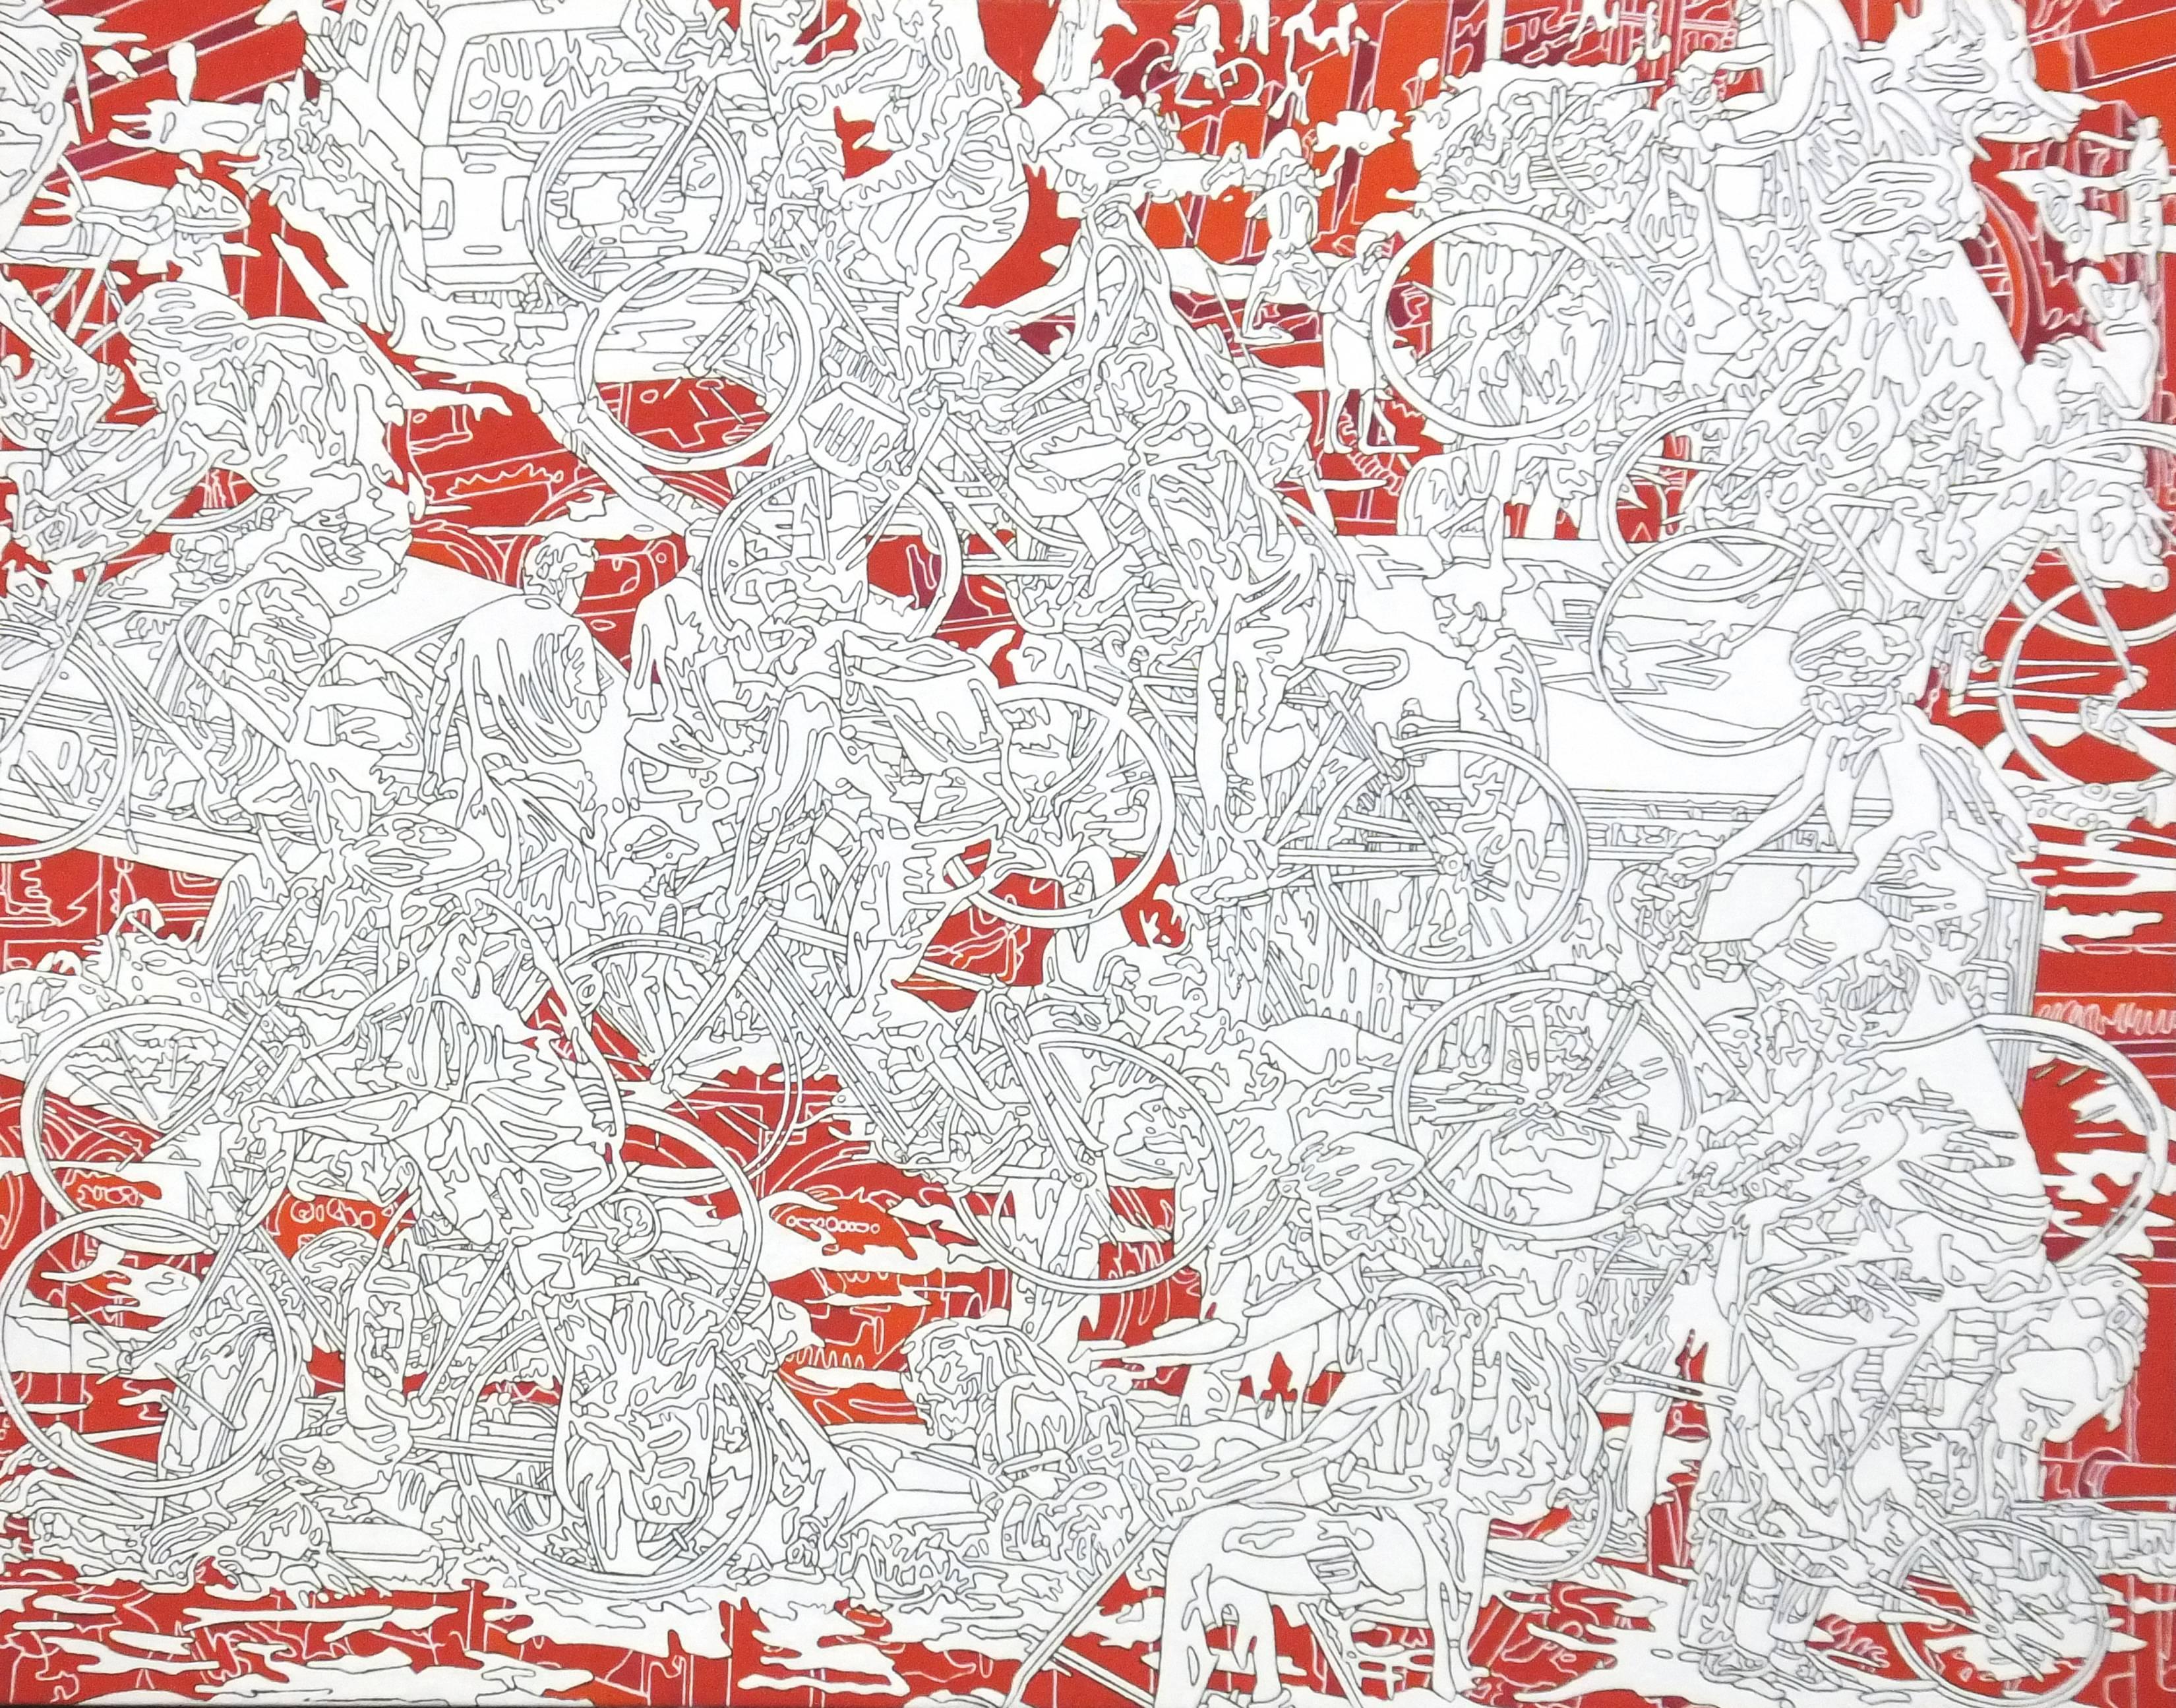 Kentaro Hiramatsu Figurative Painting - Park-r-1, red and white line drawing, busy city scene, abstracted people